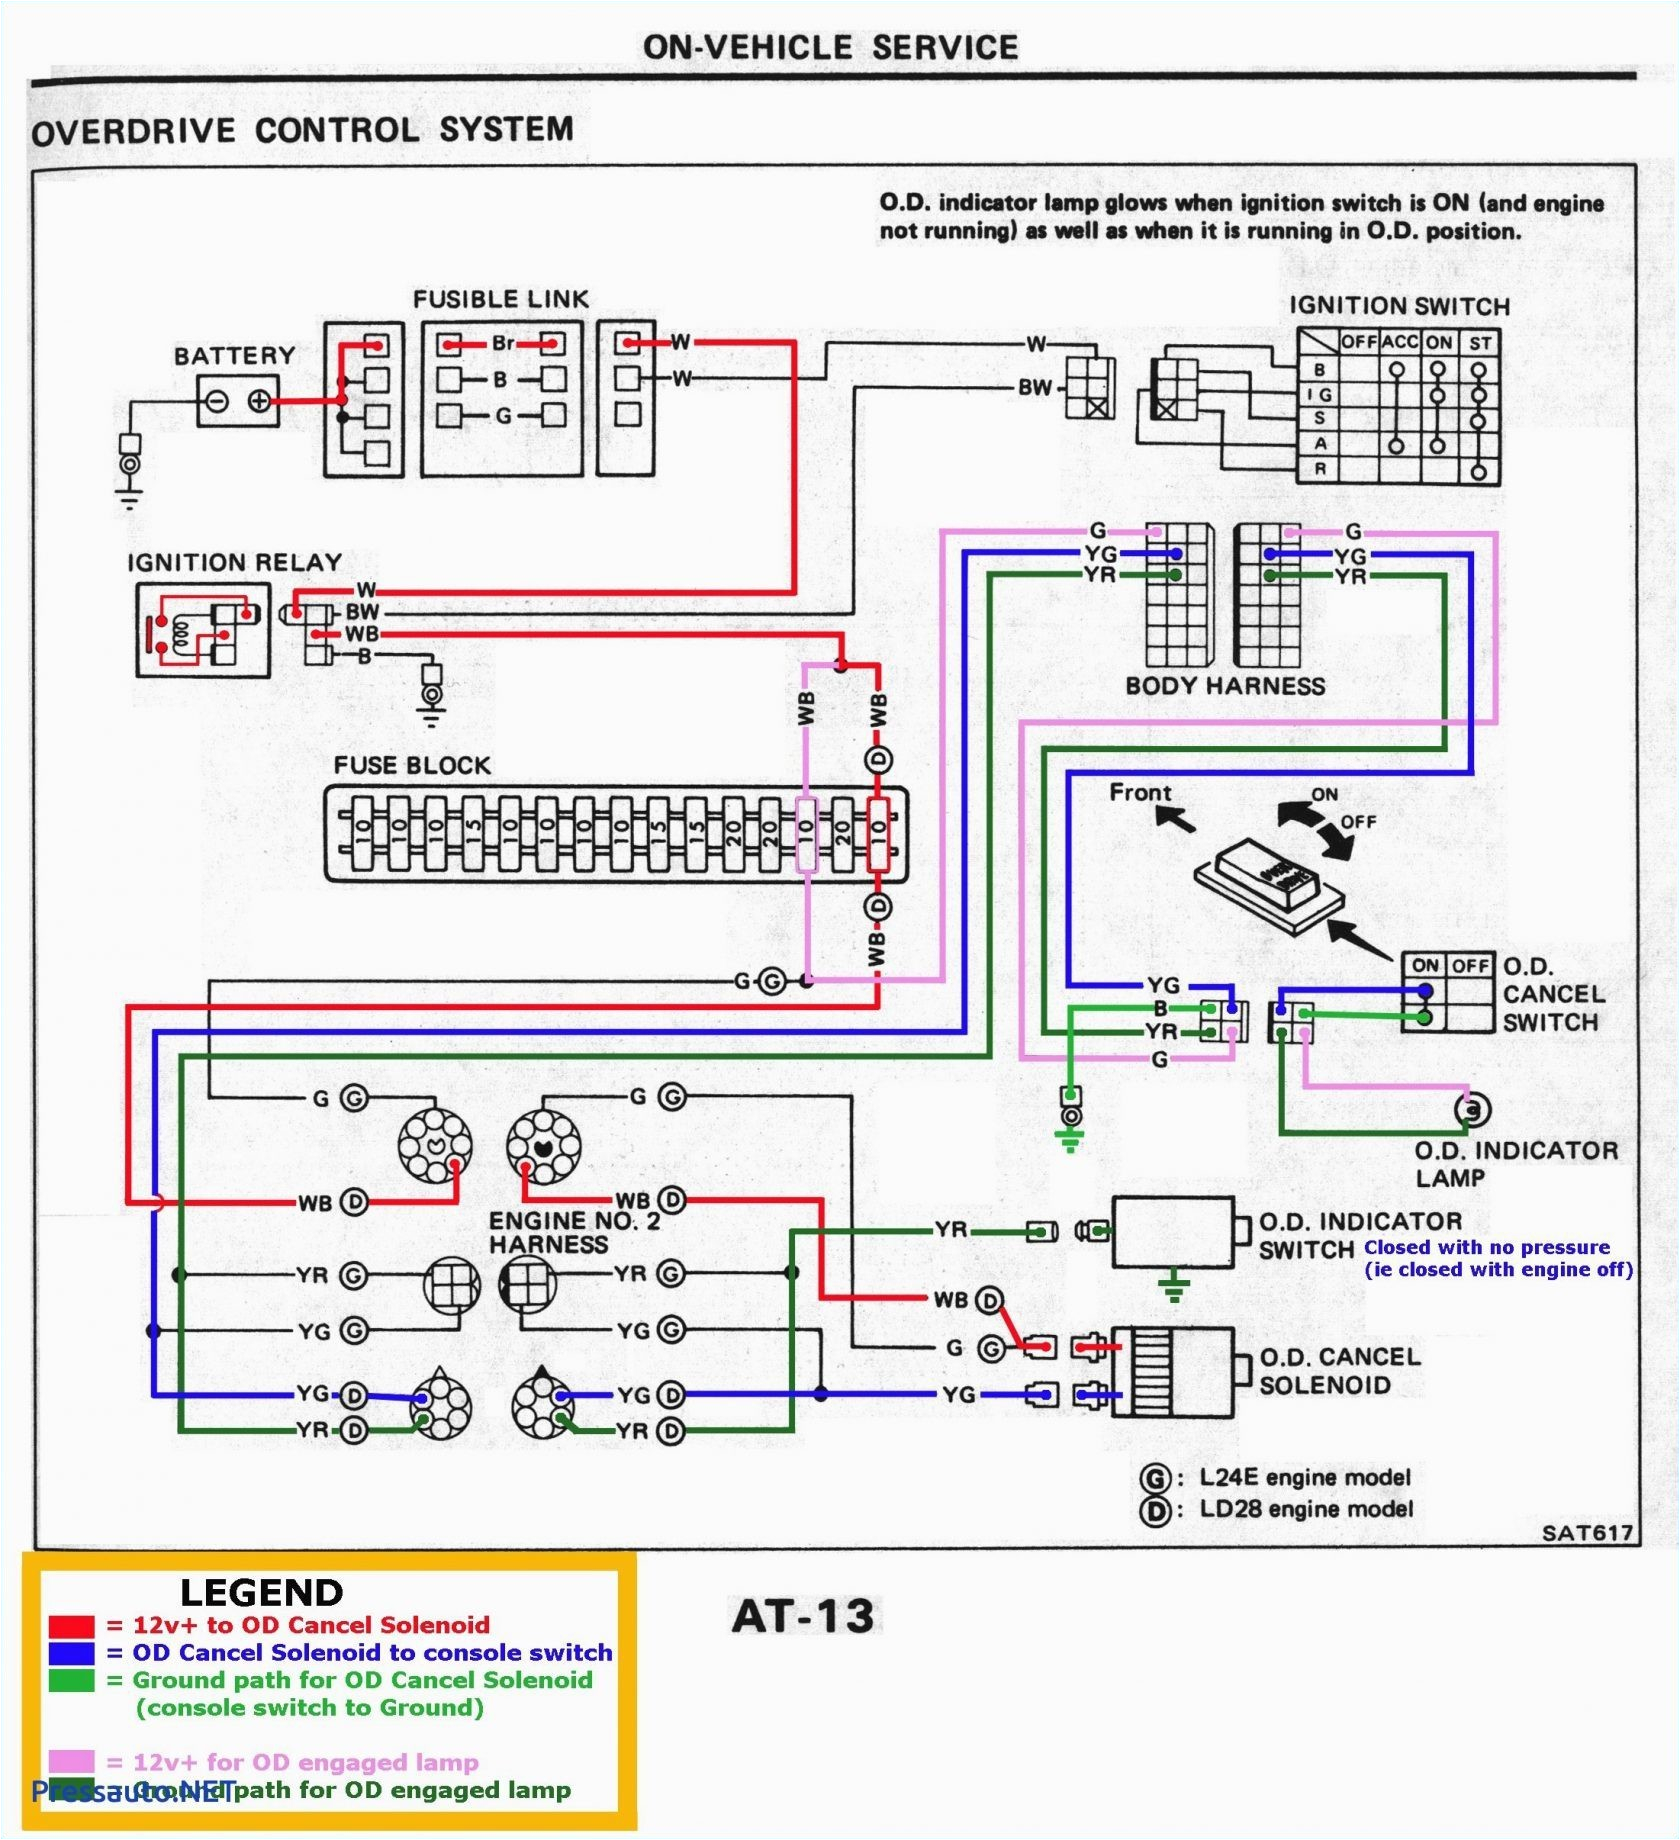 2002 yukon license plate light wiring diagram wiring diagram view jpeg 712kb need a diagram of the stereo wireing in a 2001 chevy tah